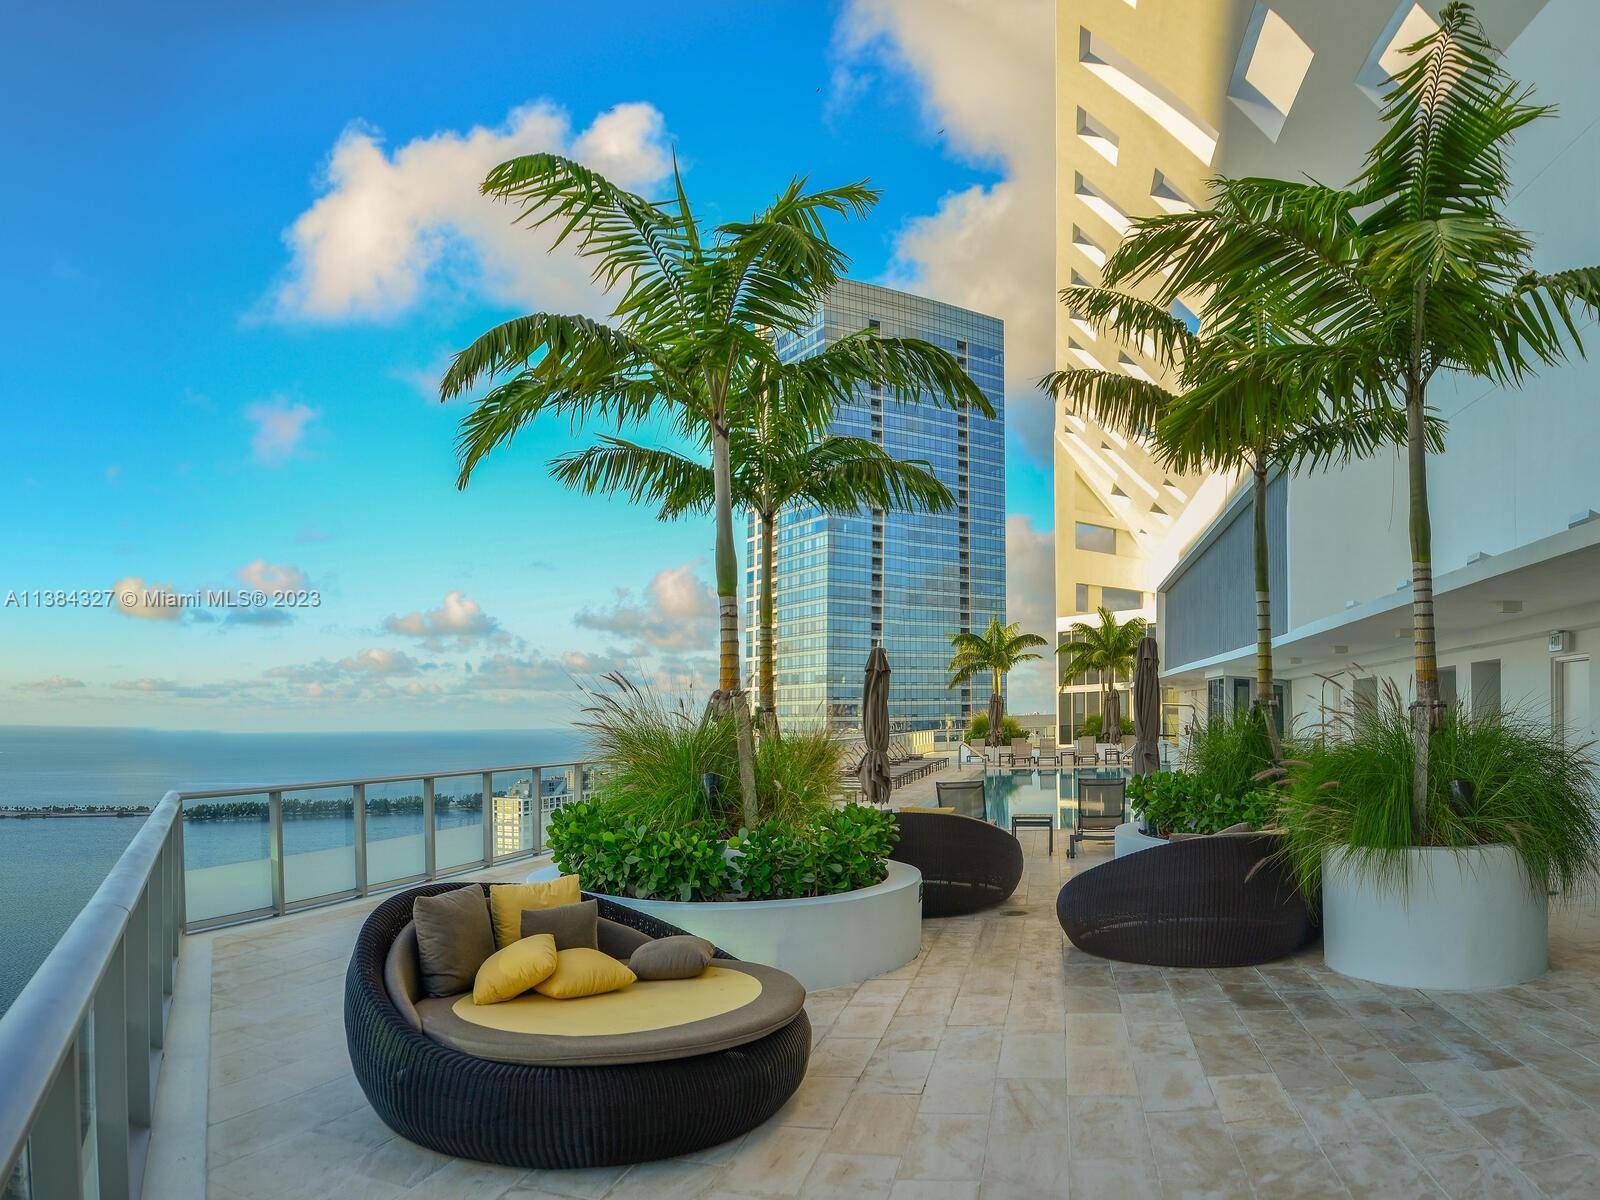 LUXURY UNIT AT BRICKELL BAY DR, 2 BALCONIES, ONE WITH CITY VIEWS AND THE OTHER ONE WITH WATER VIEWS.